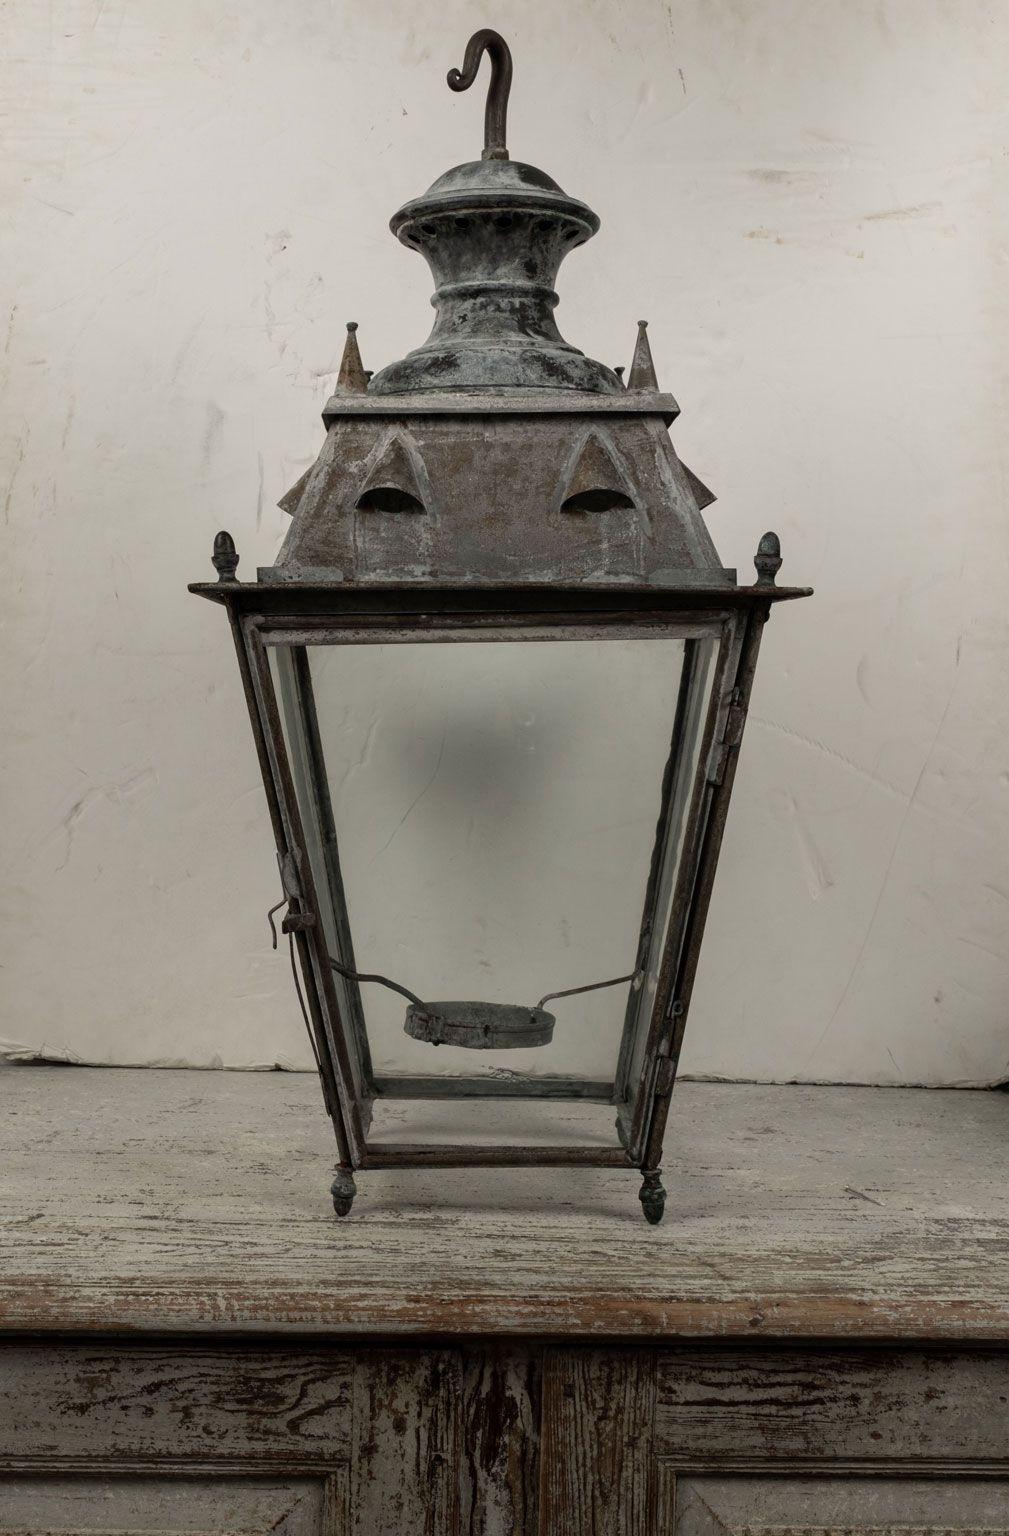 Tole and glass French lantern dating to 19th century. Four-sided iron frame, tole top and glass paneled sides. Not wired for electricity, but can be wired, or fitted for usage with gas, for an additional cost.

Note: Original/early finish on antique